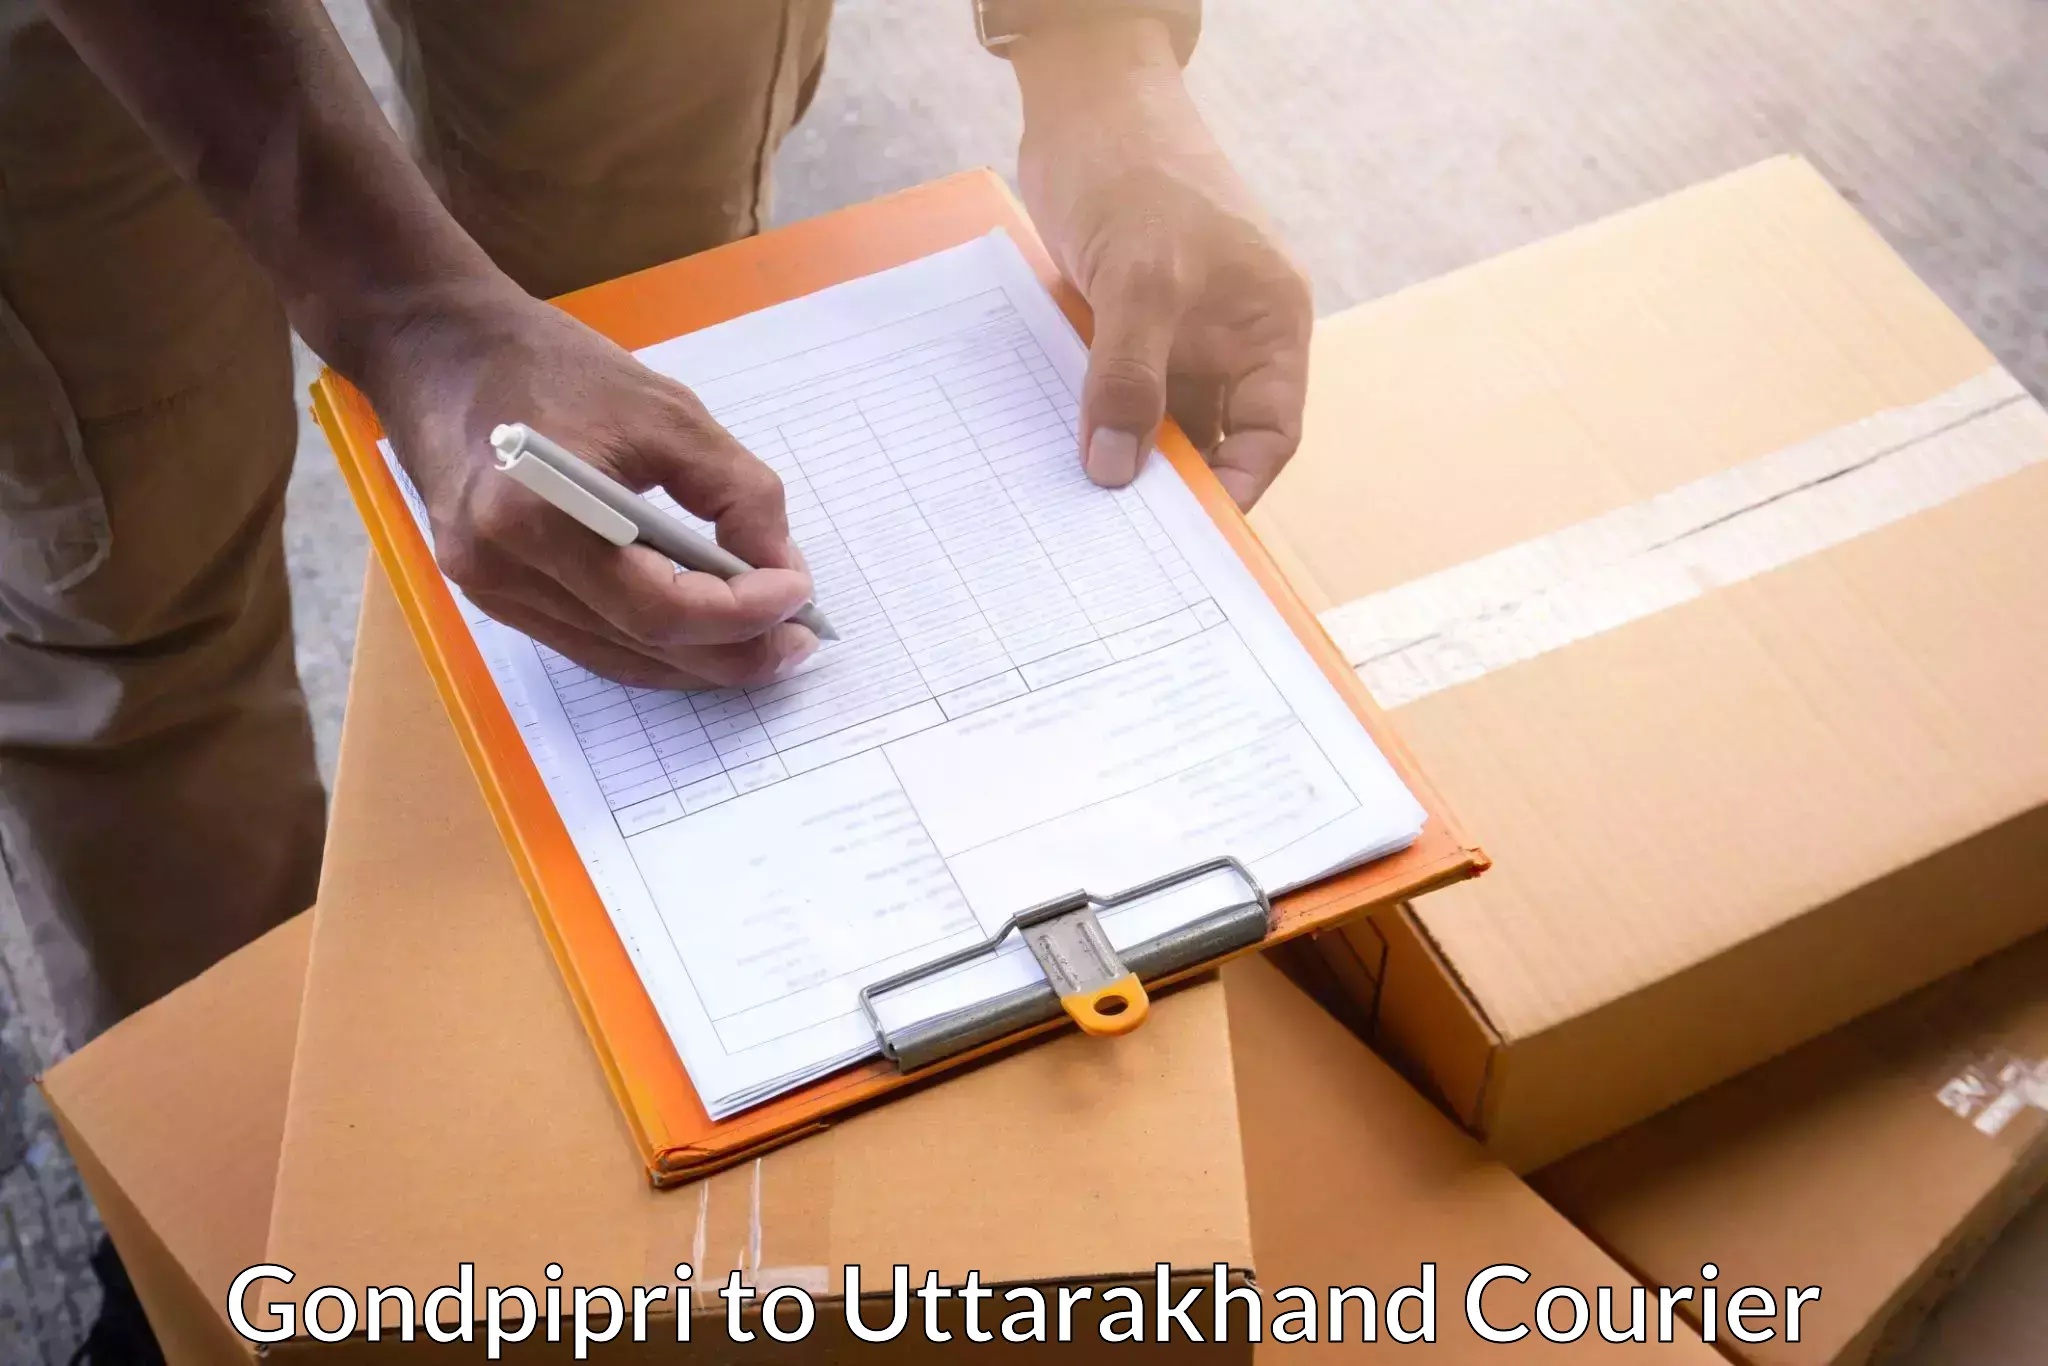 Automated parcel services Gondpipri to Roorkee